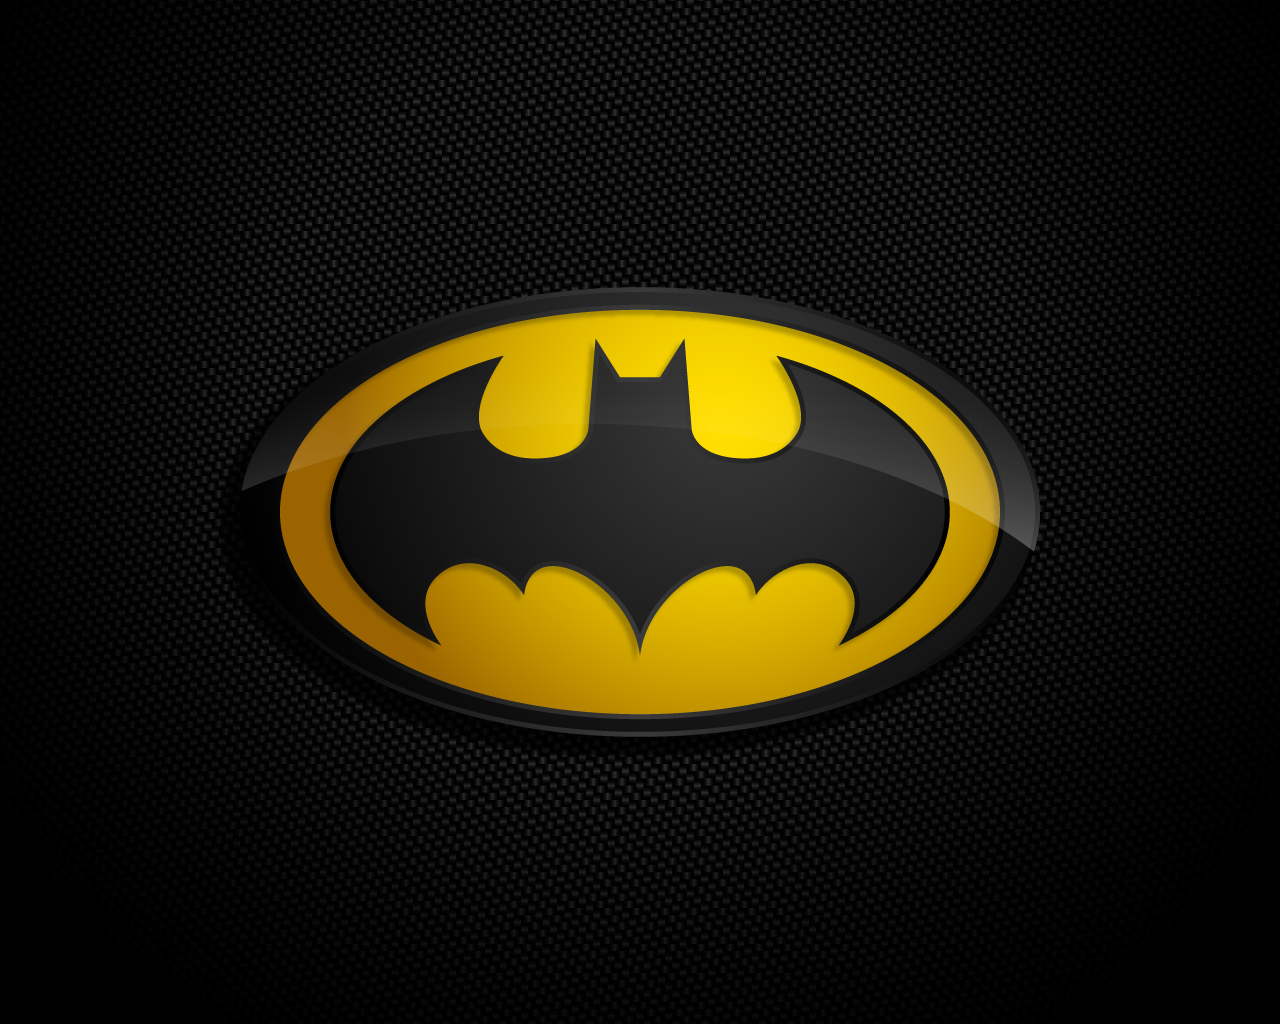 16 Batman Logo Pictures - Image Abyss